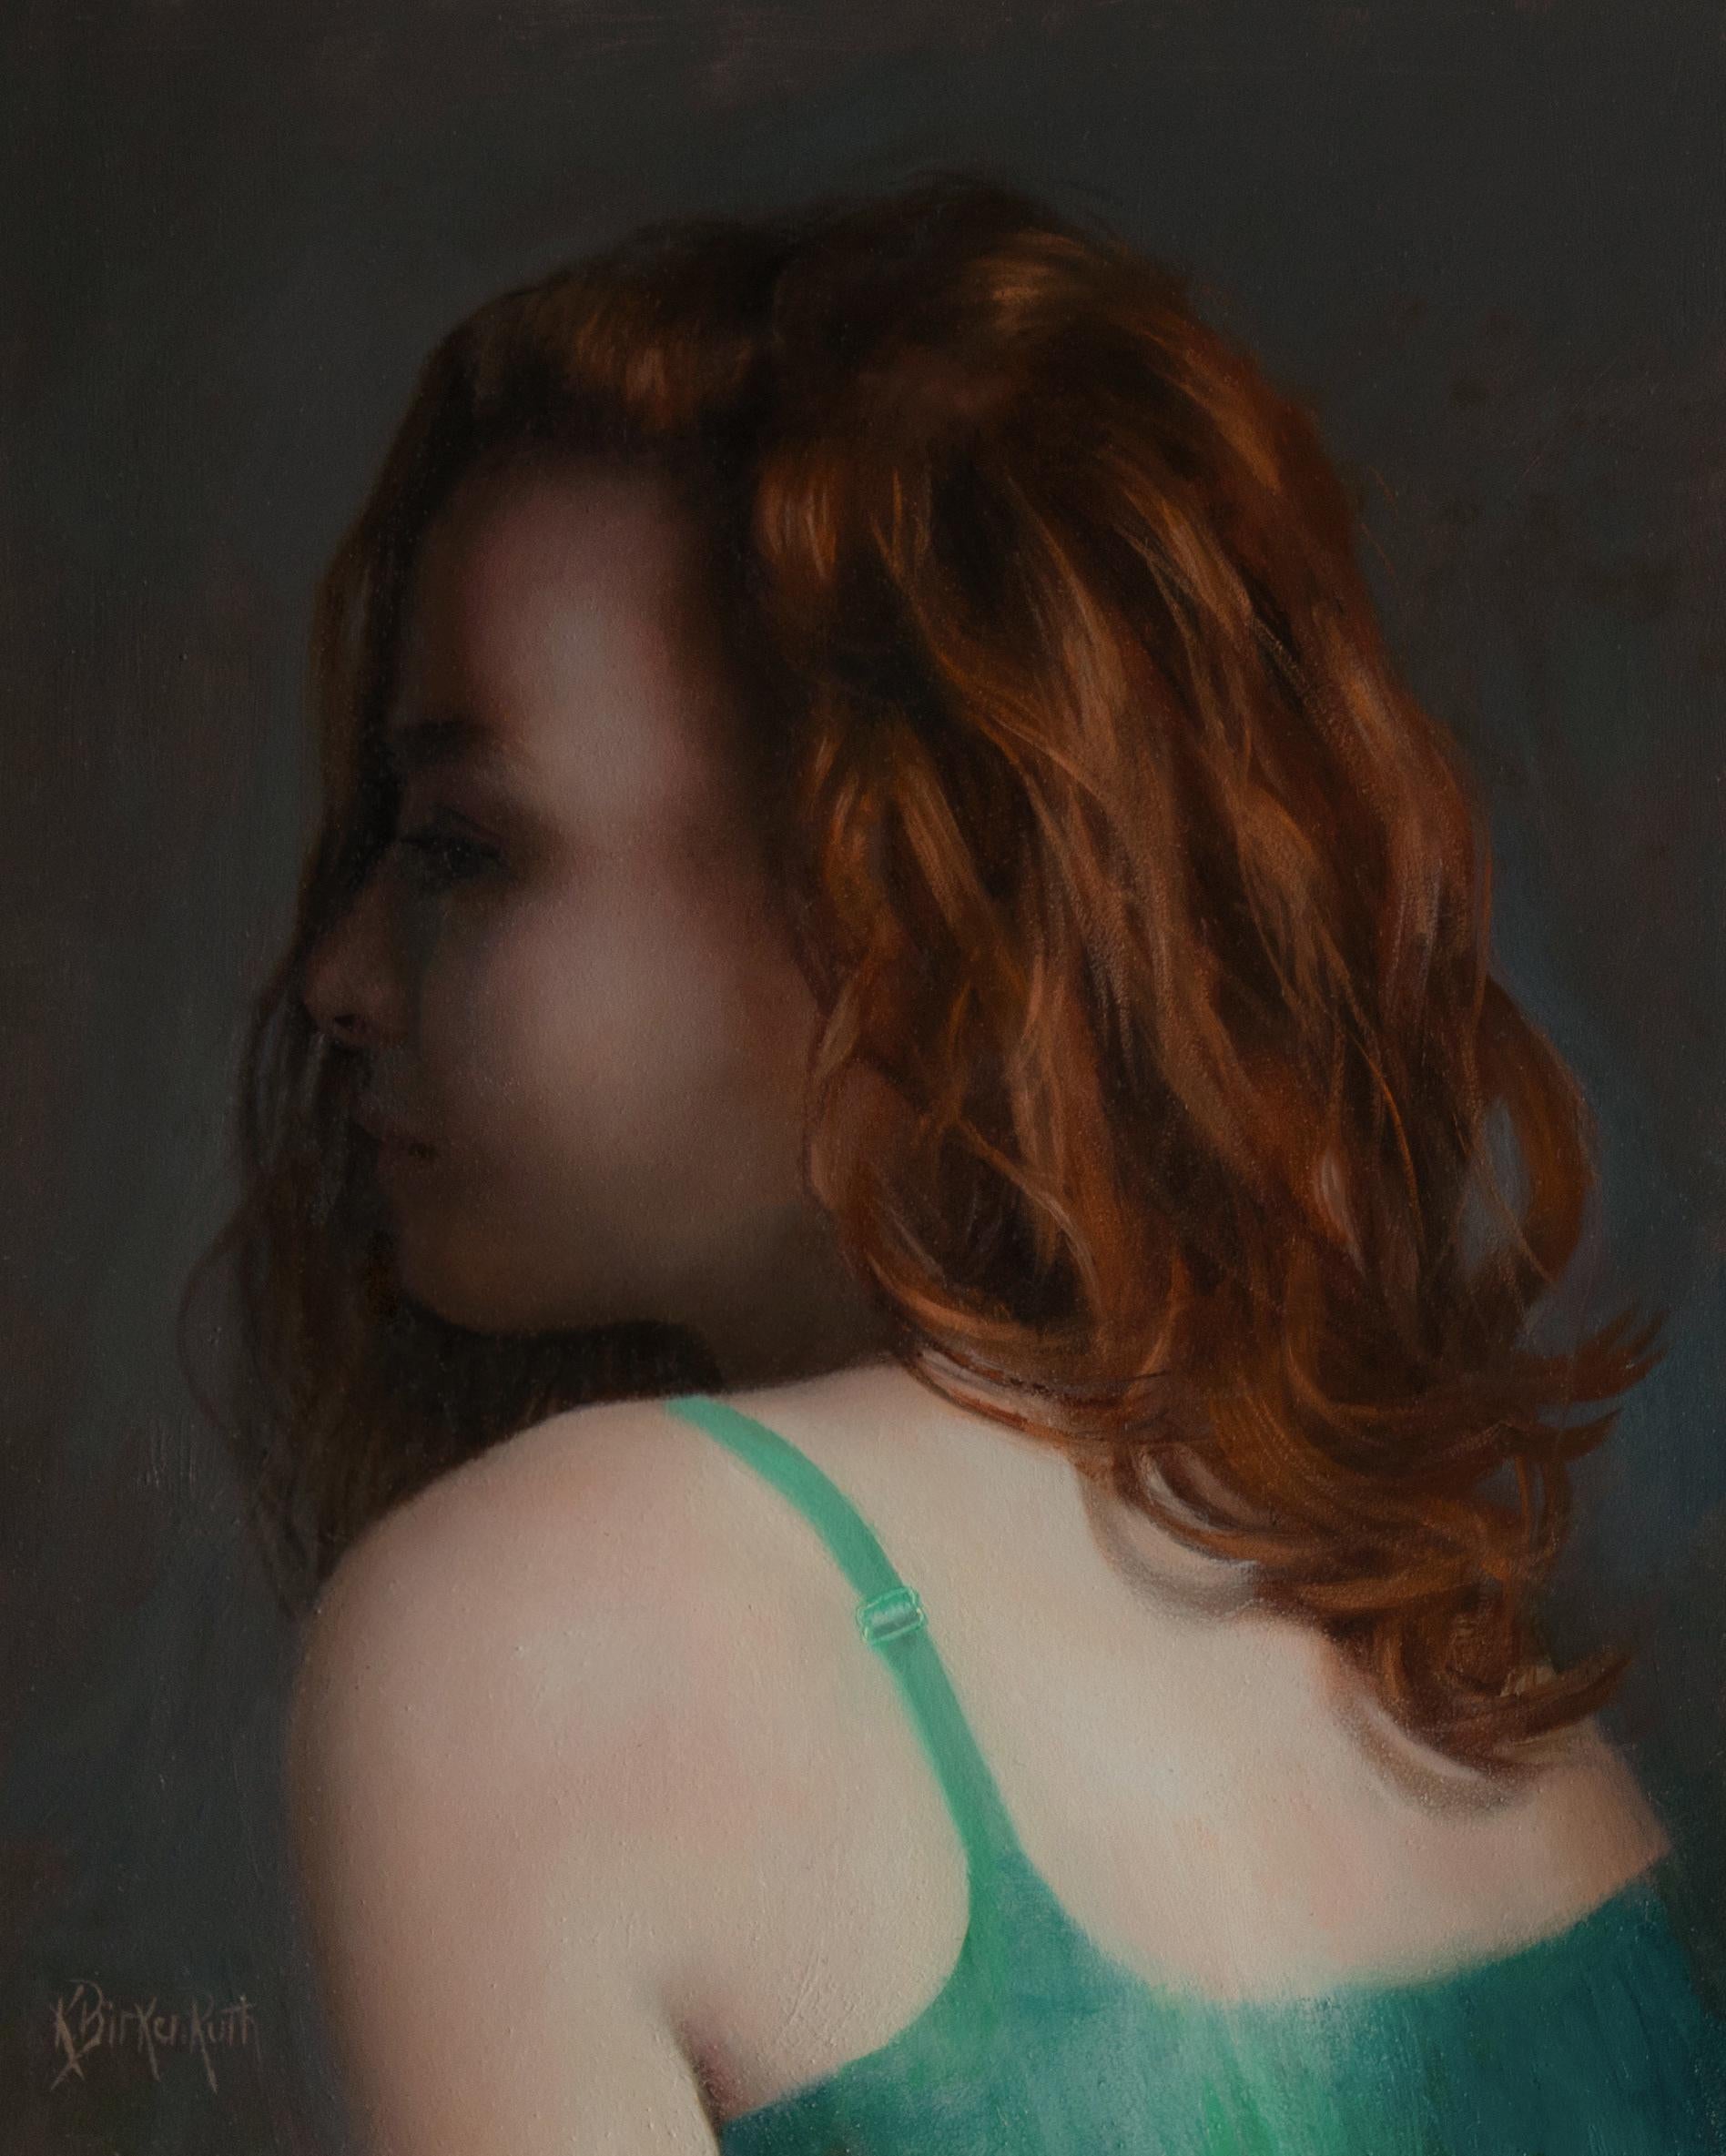 Kelly Birkenruth's "Portrait in Green" (2021) is an exquisite original oil painting on panel, measuring 10 x 8 x 2 inches. This stunning piece captures the profile of a young woman with flowing red hair, elegantly dressed in a green garment. The